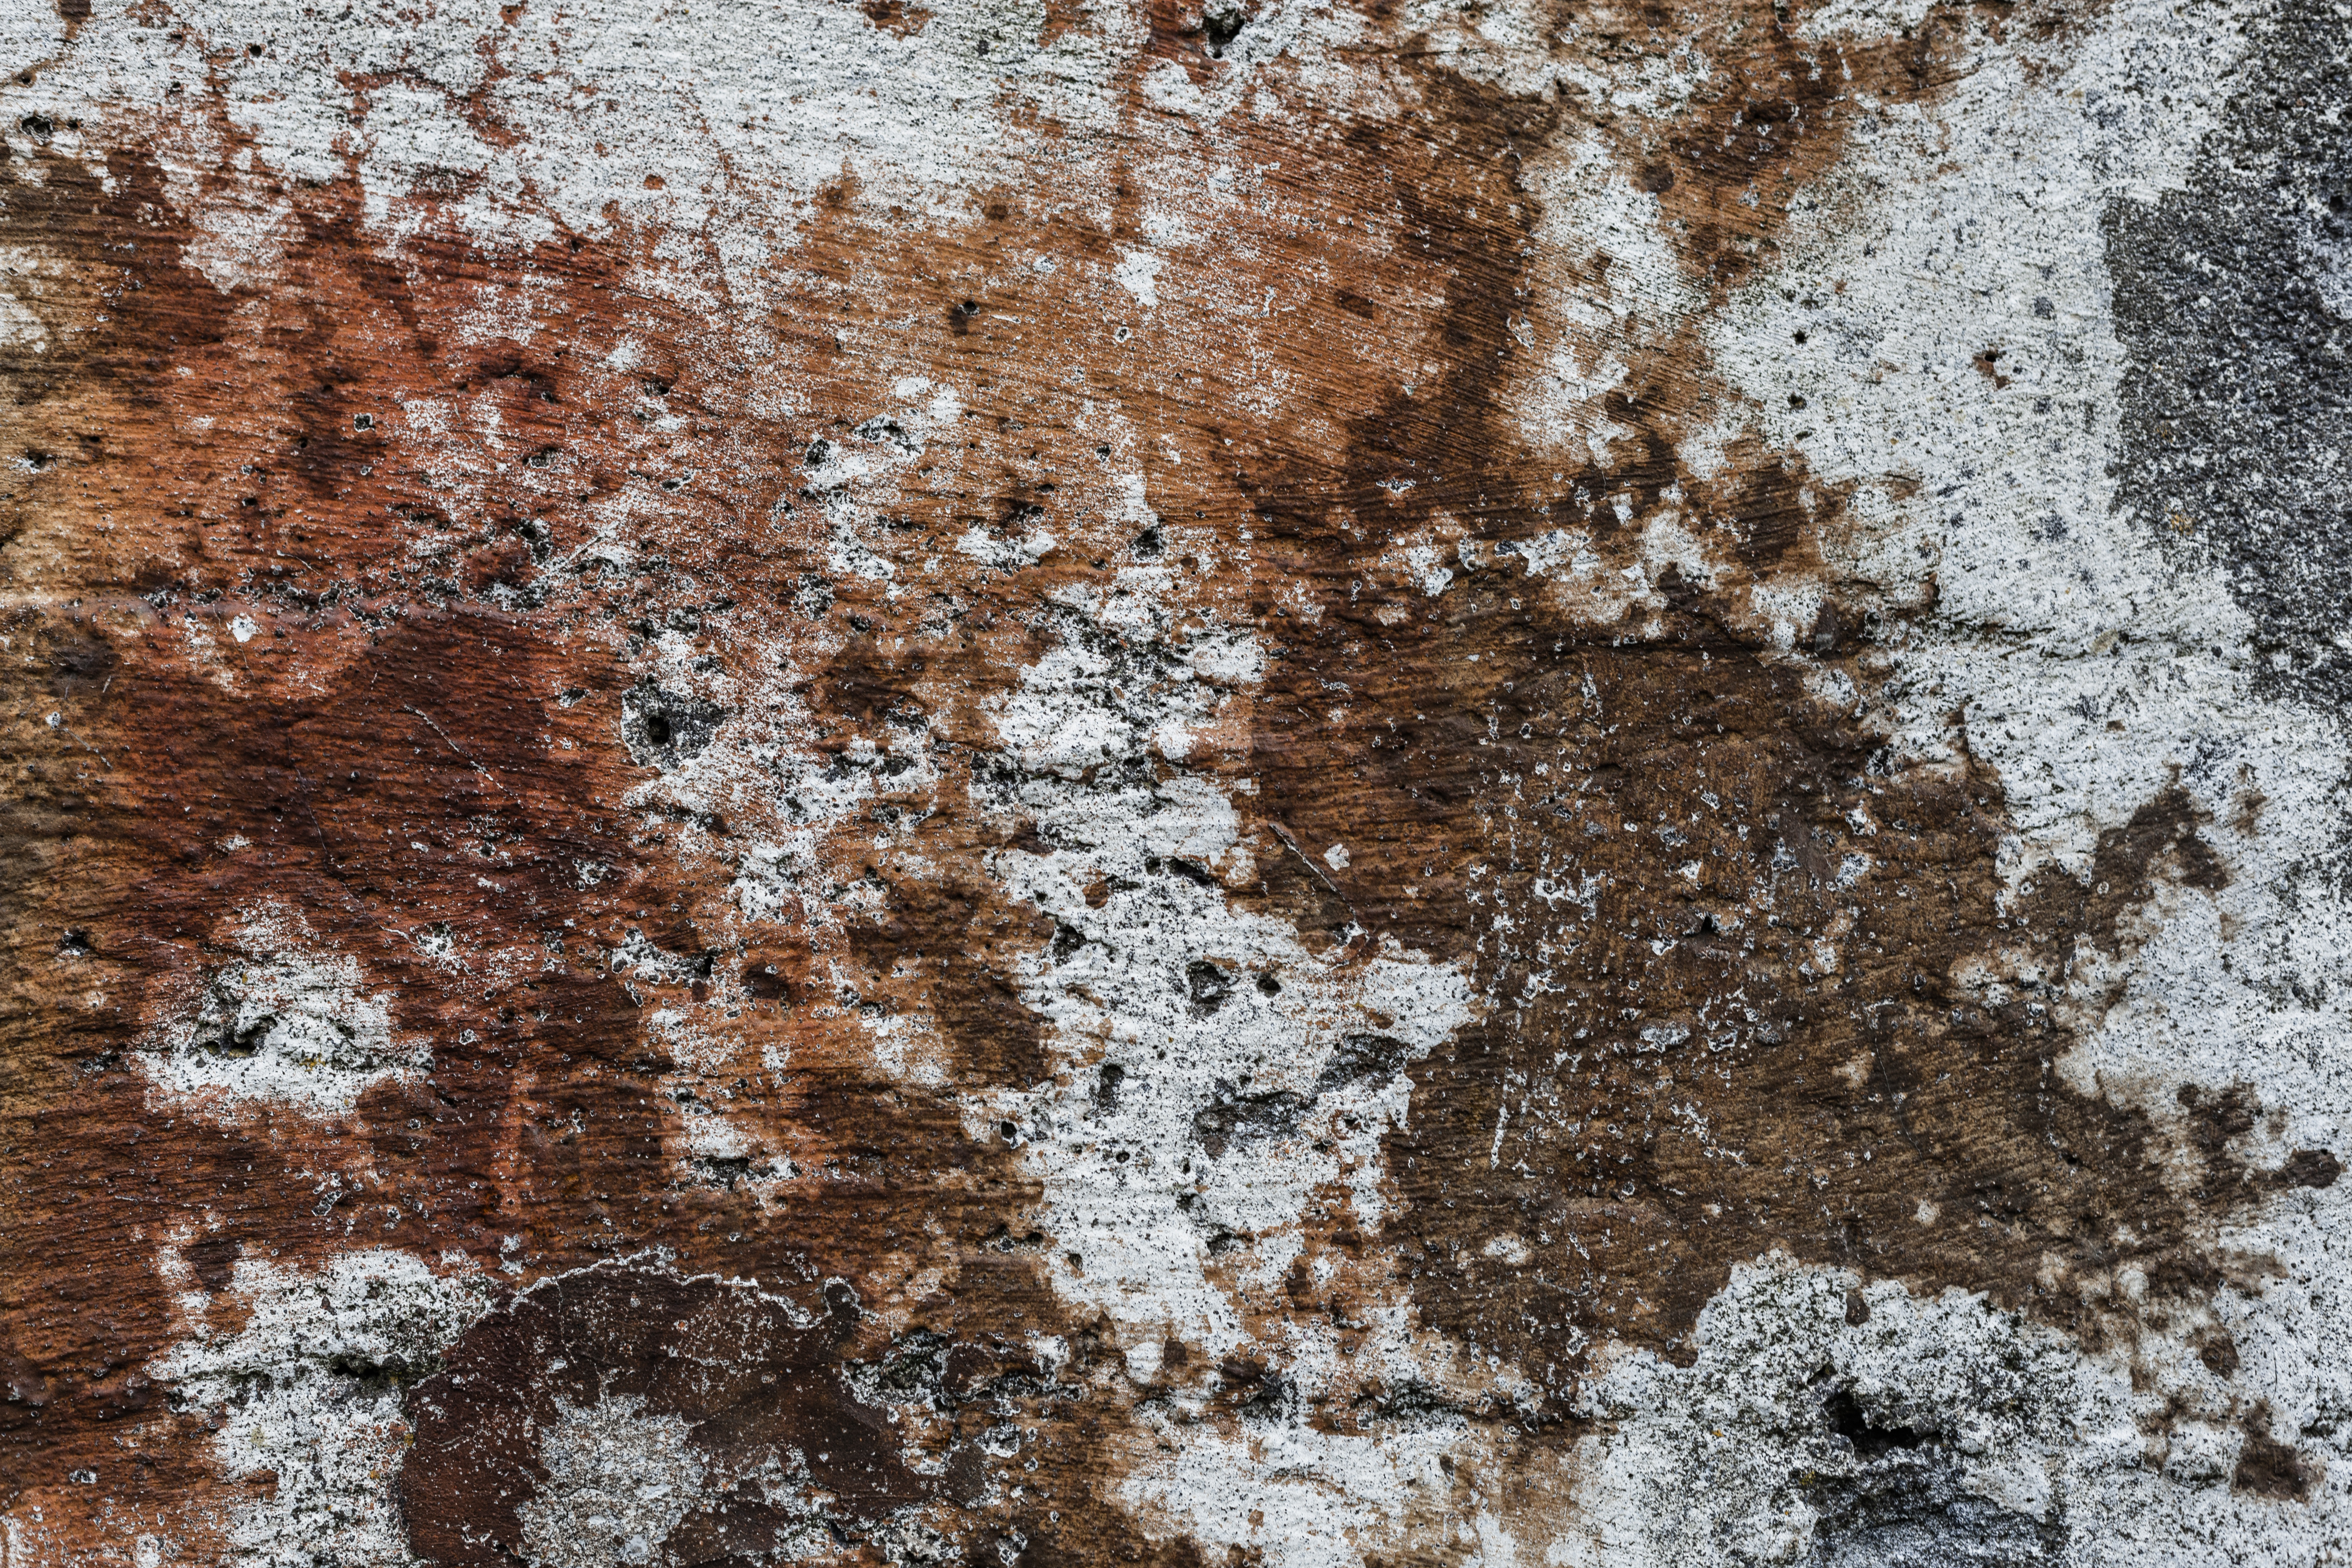 Gritty wall texture photo